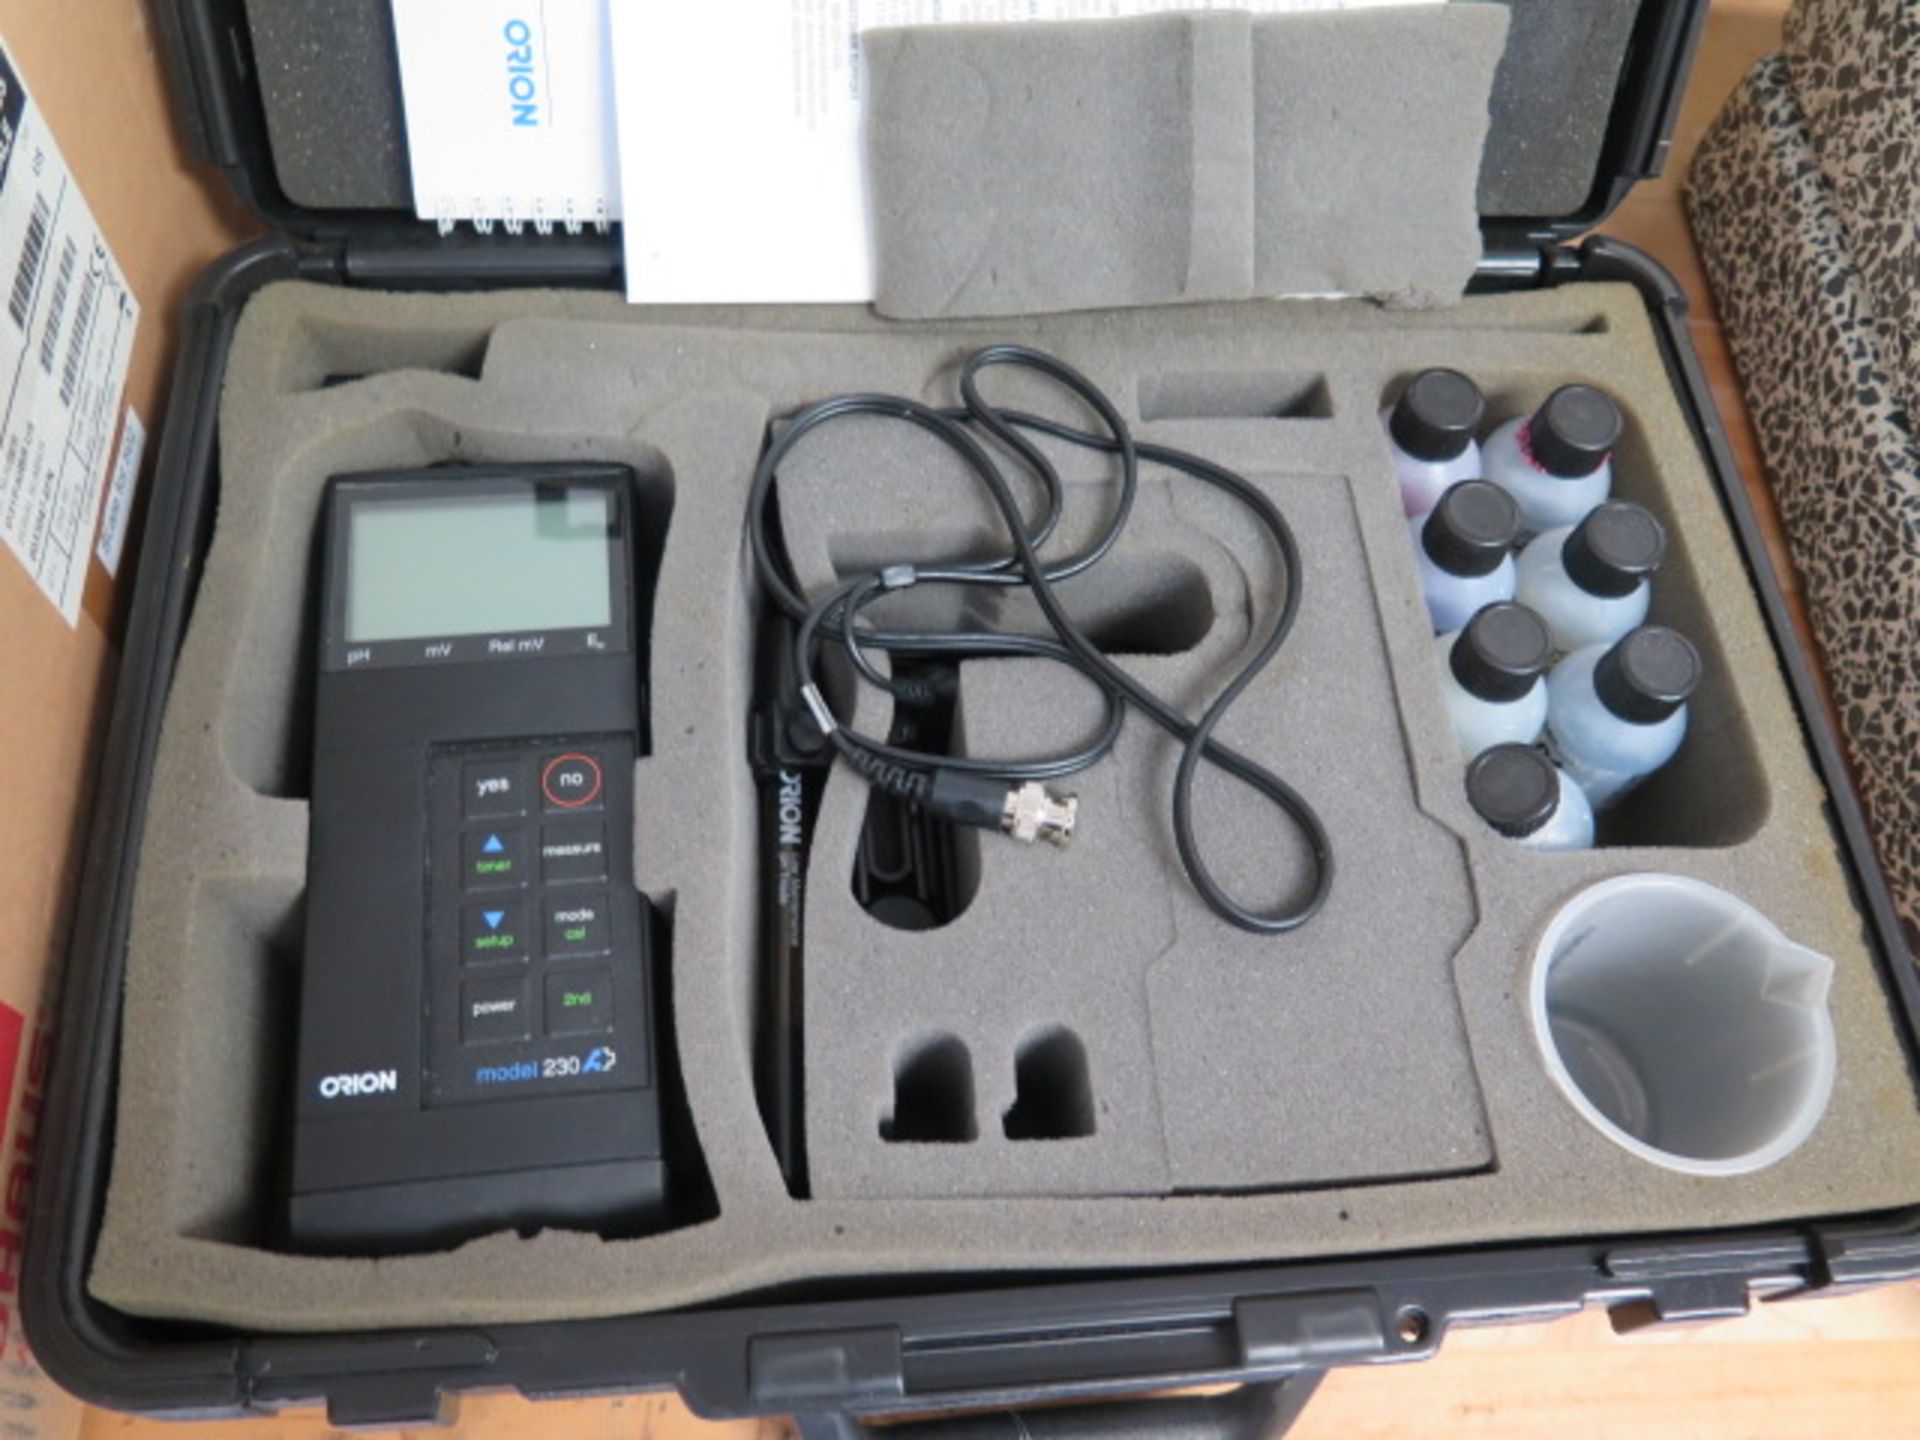 Orion 230 A+ Portable pH Meter (SOLD AS-IS - NO WARRANTY) - Image 2 of 7